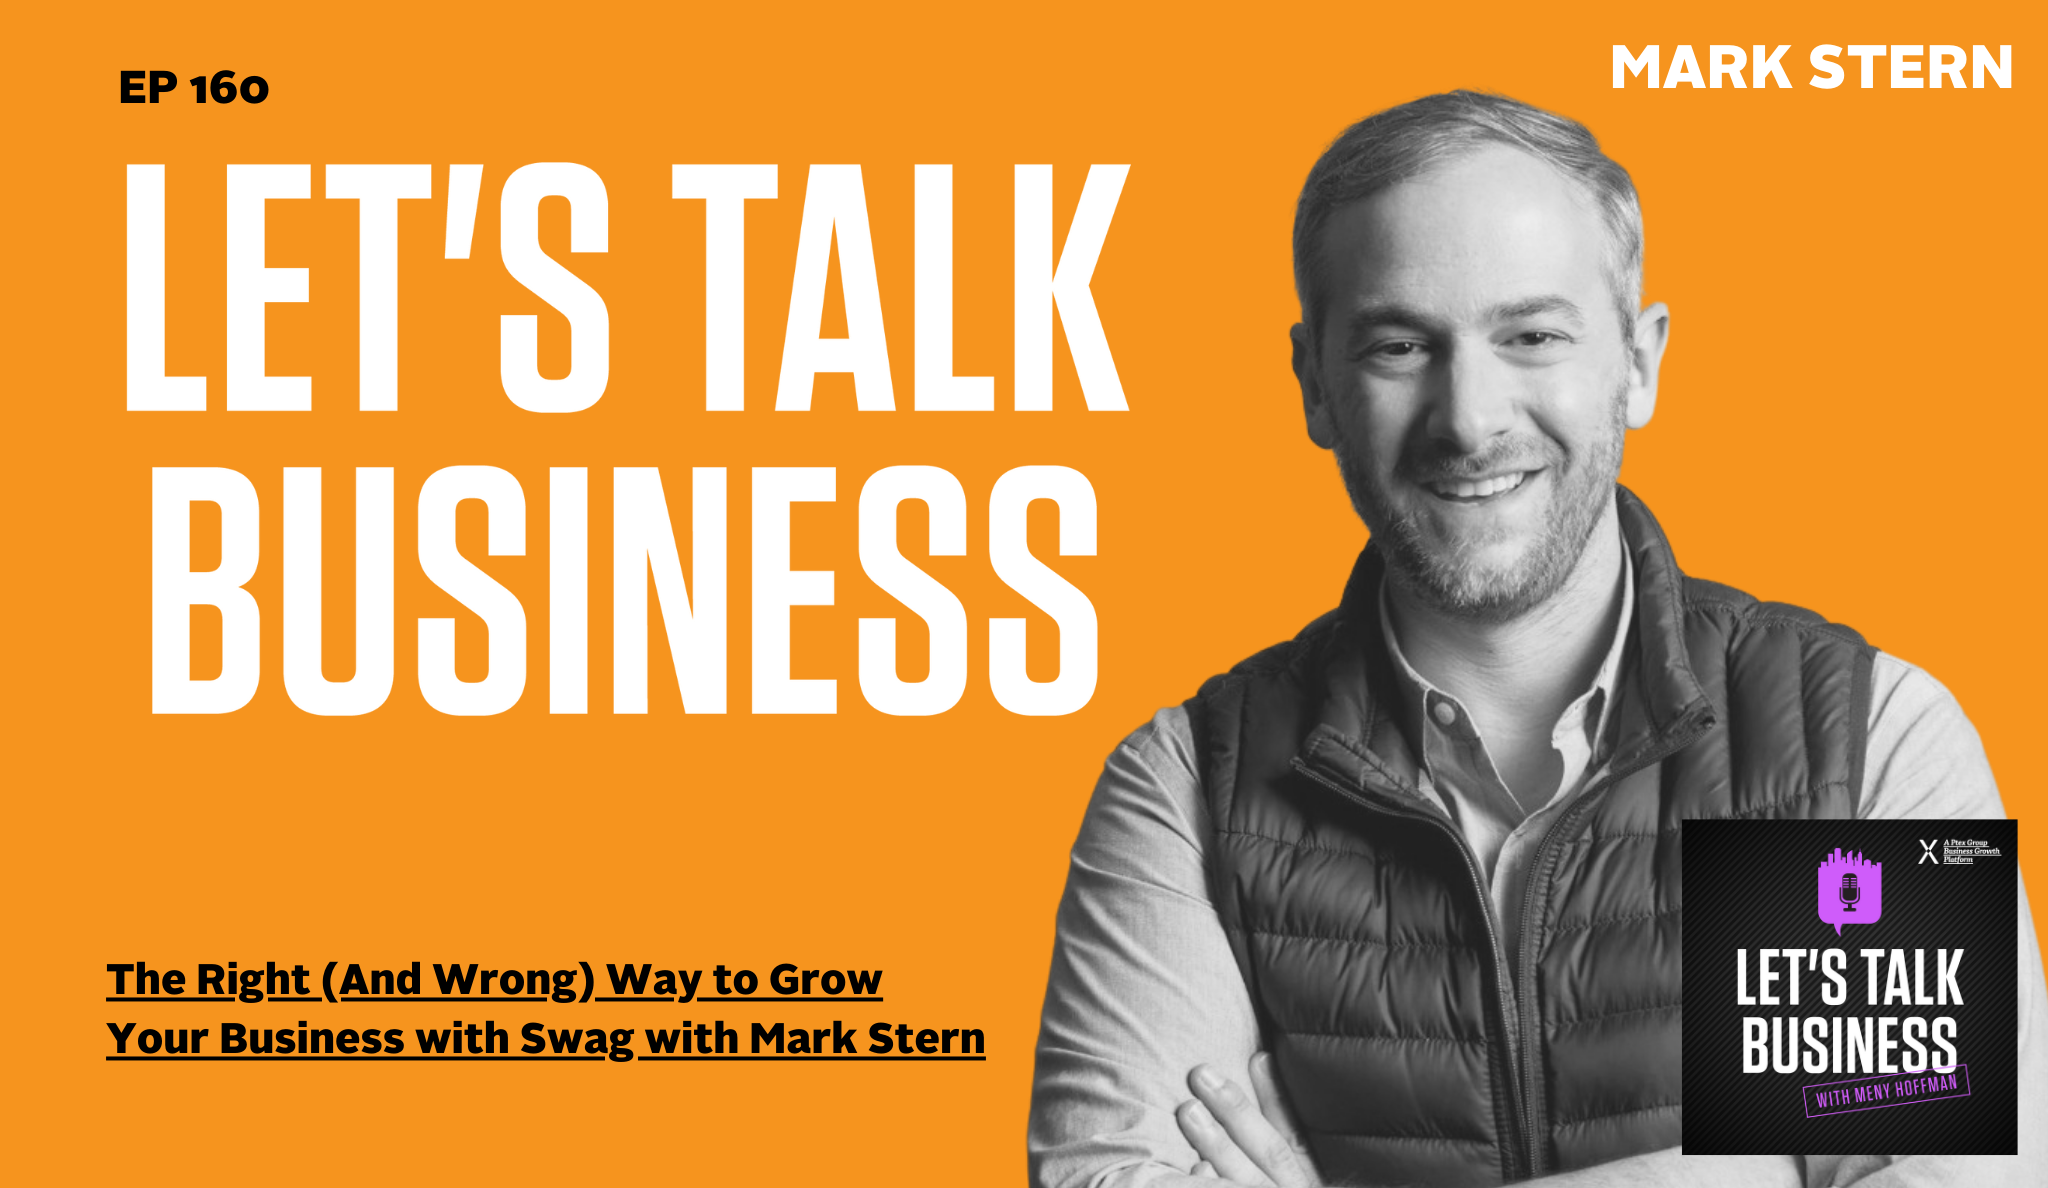 The Right (And Wrong) Way to Grow Your Business with Swag with Mark Stern